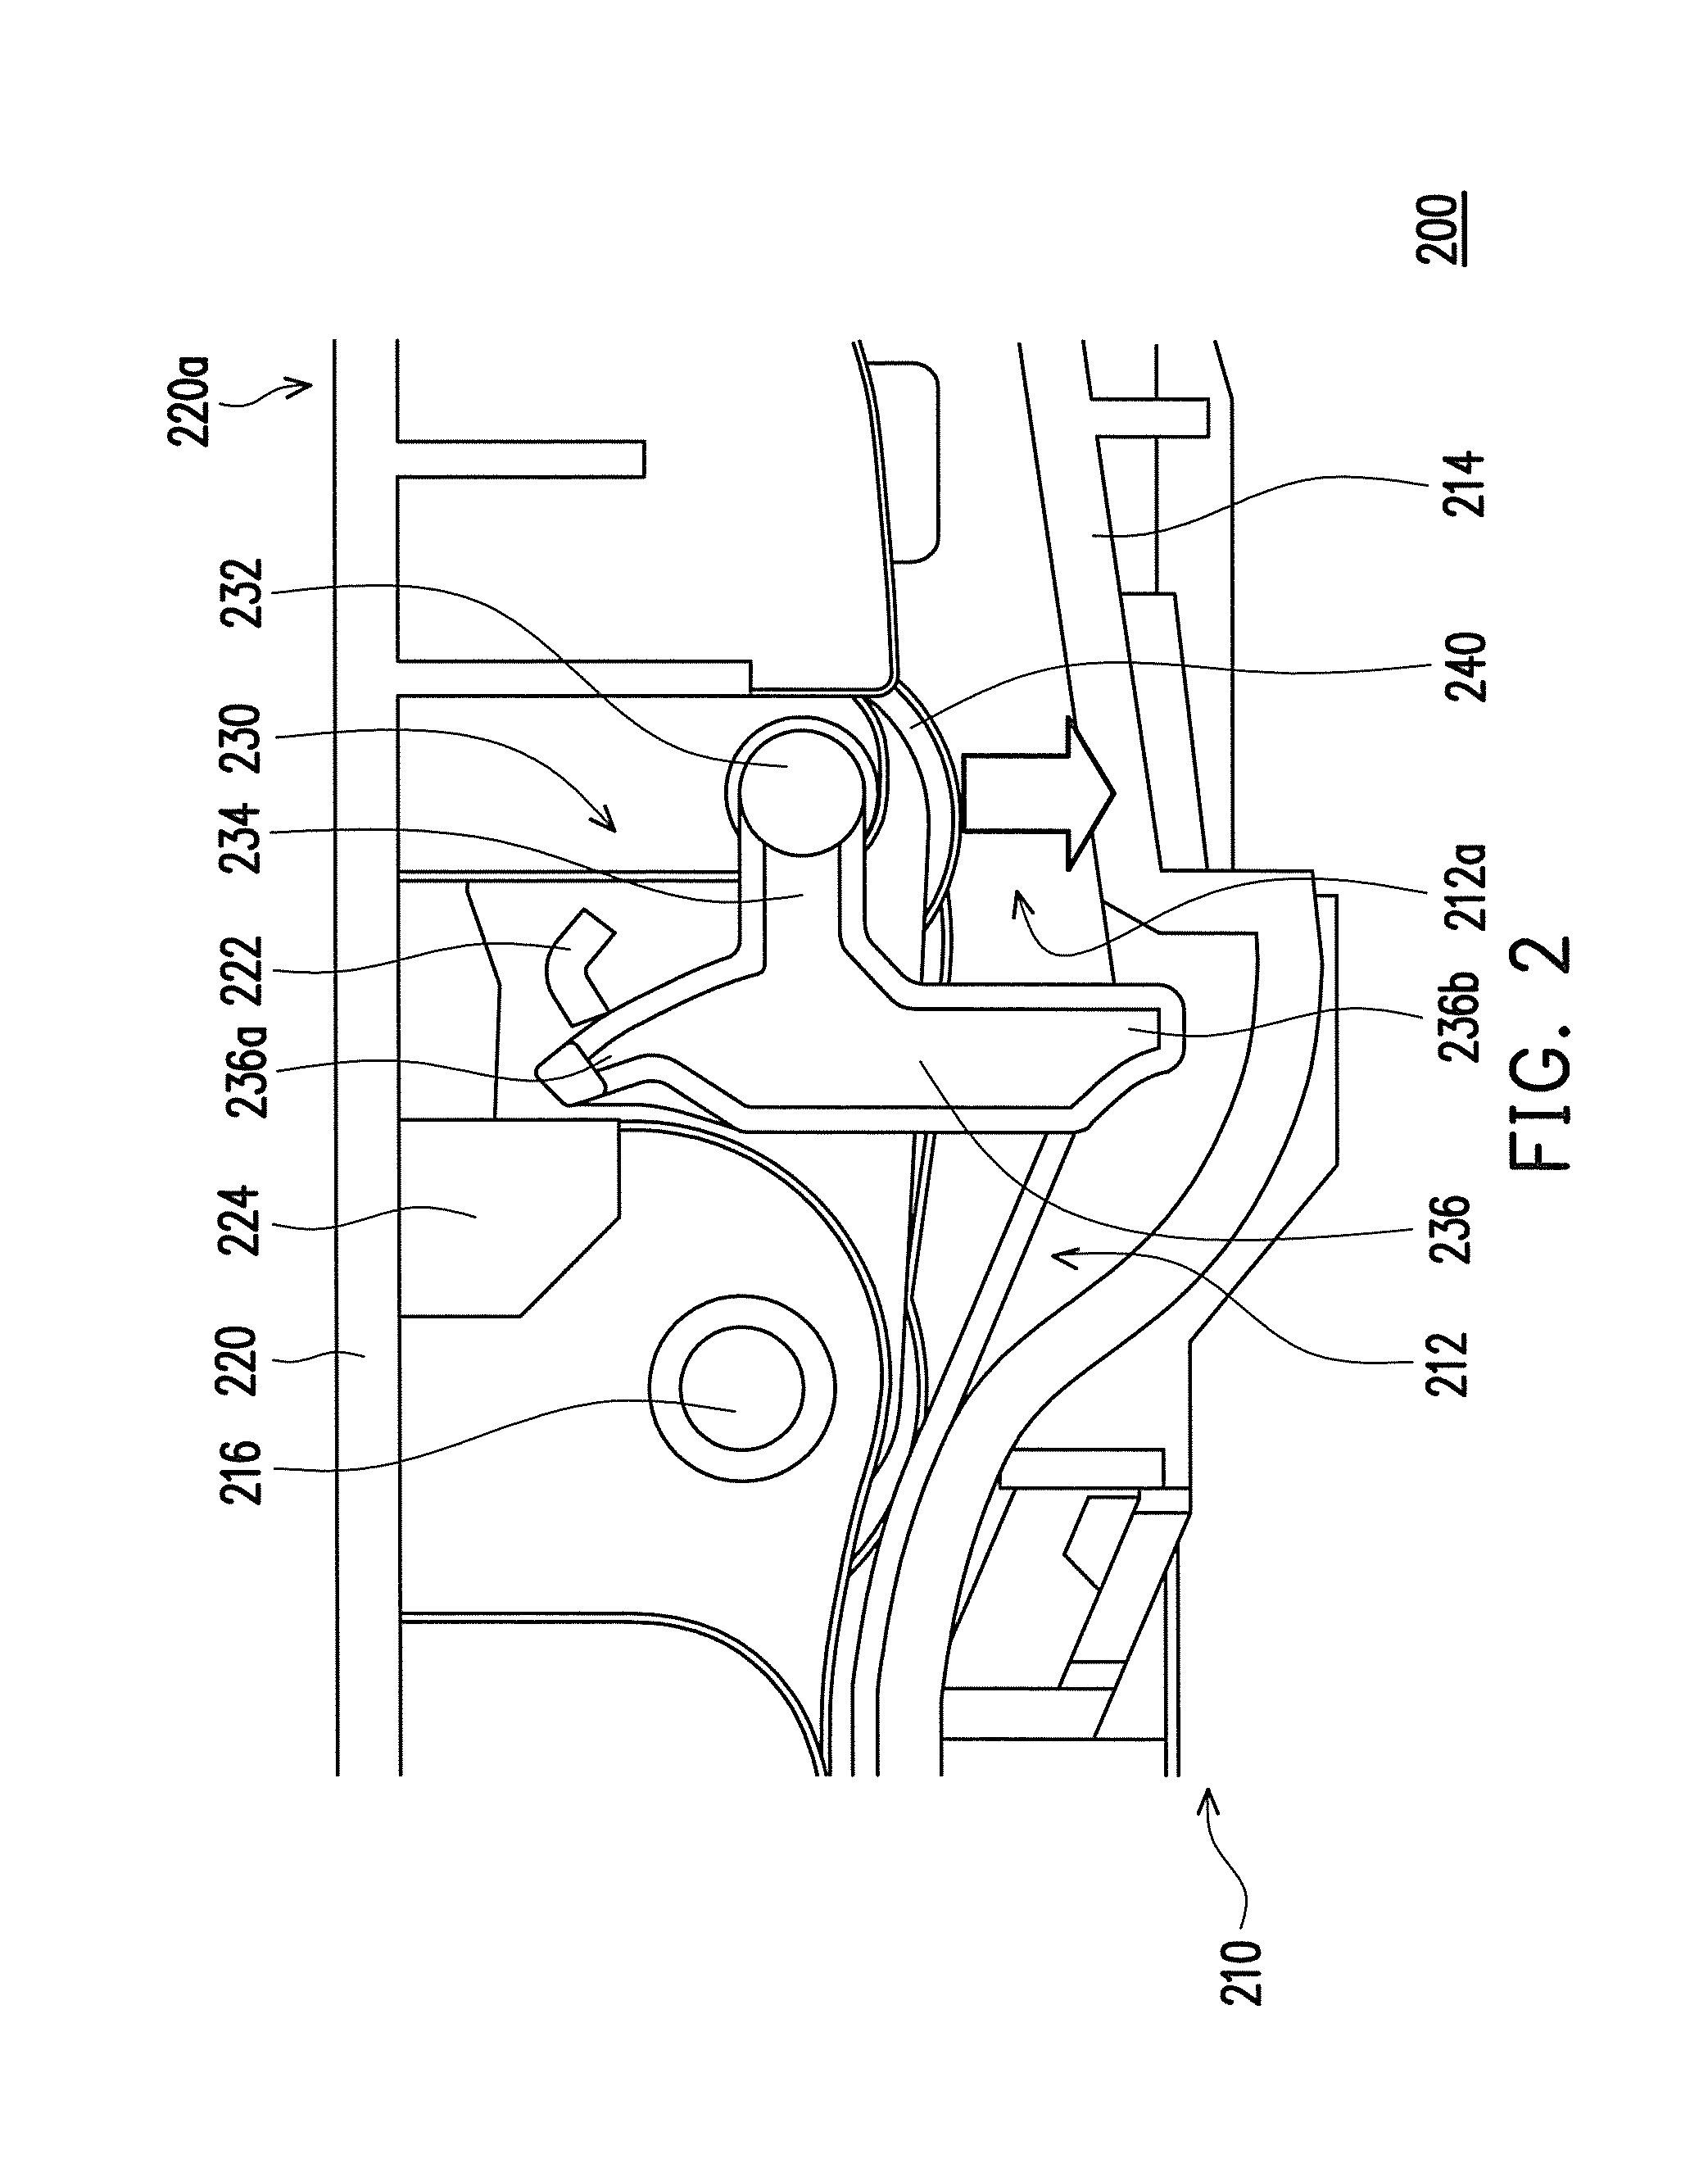 Multifunction printer and stopper applied therein